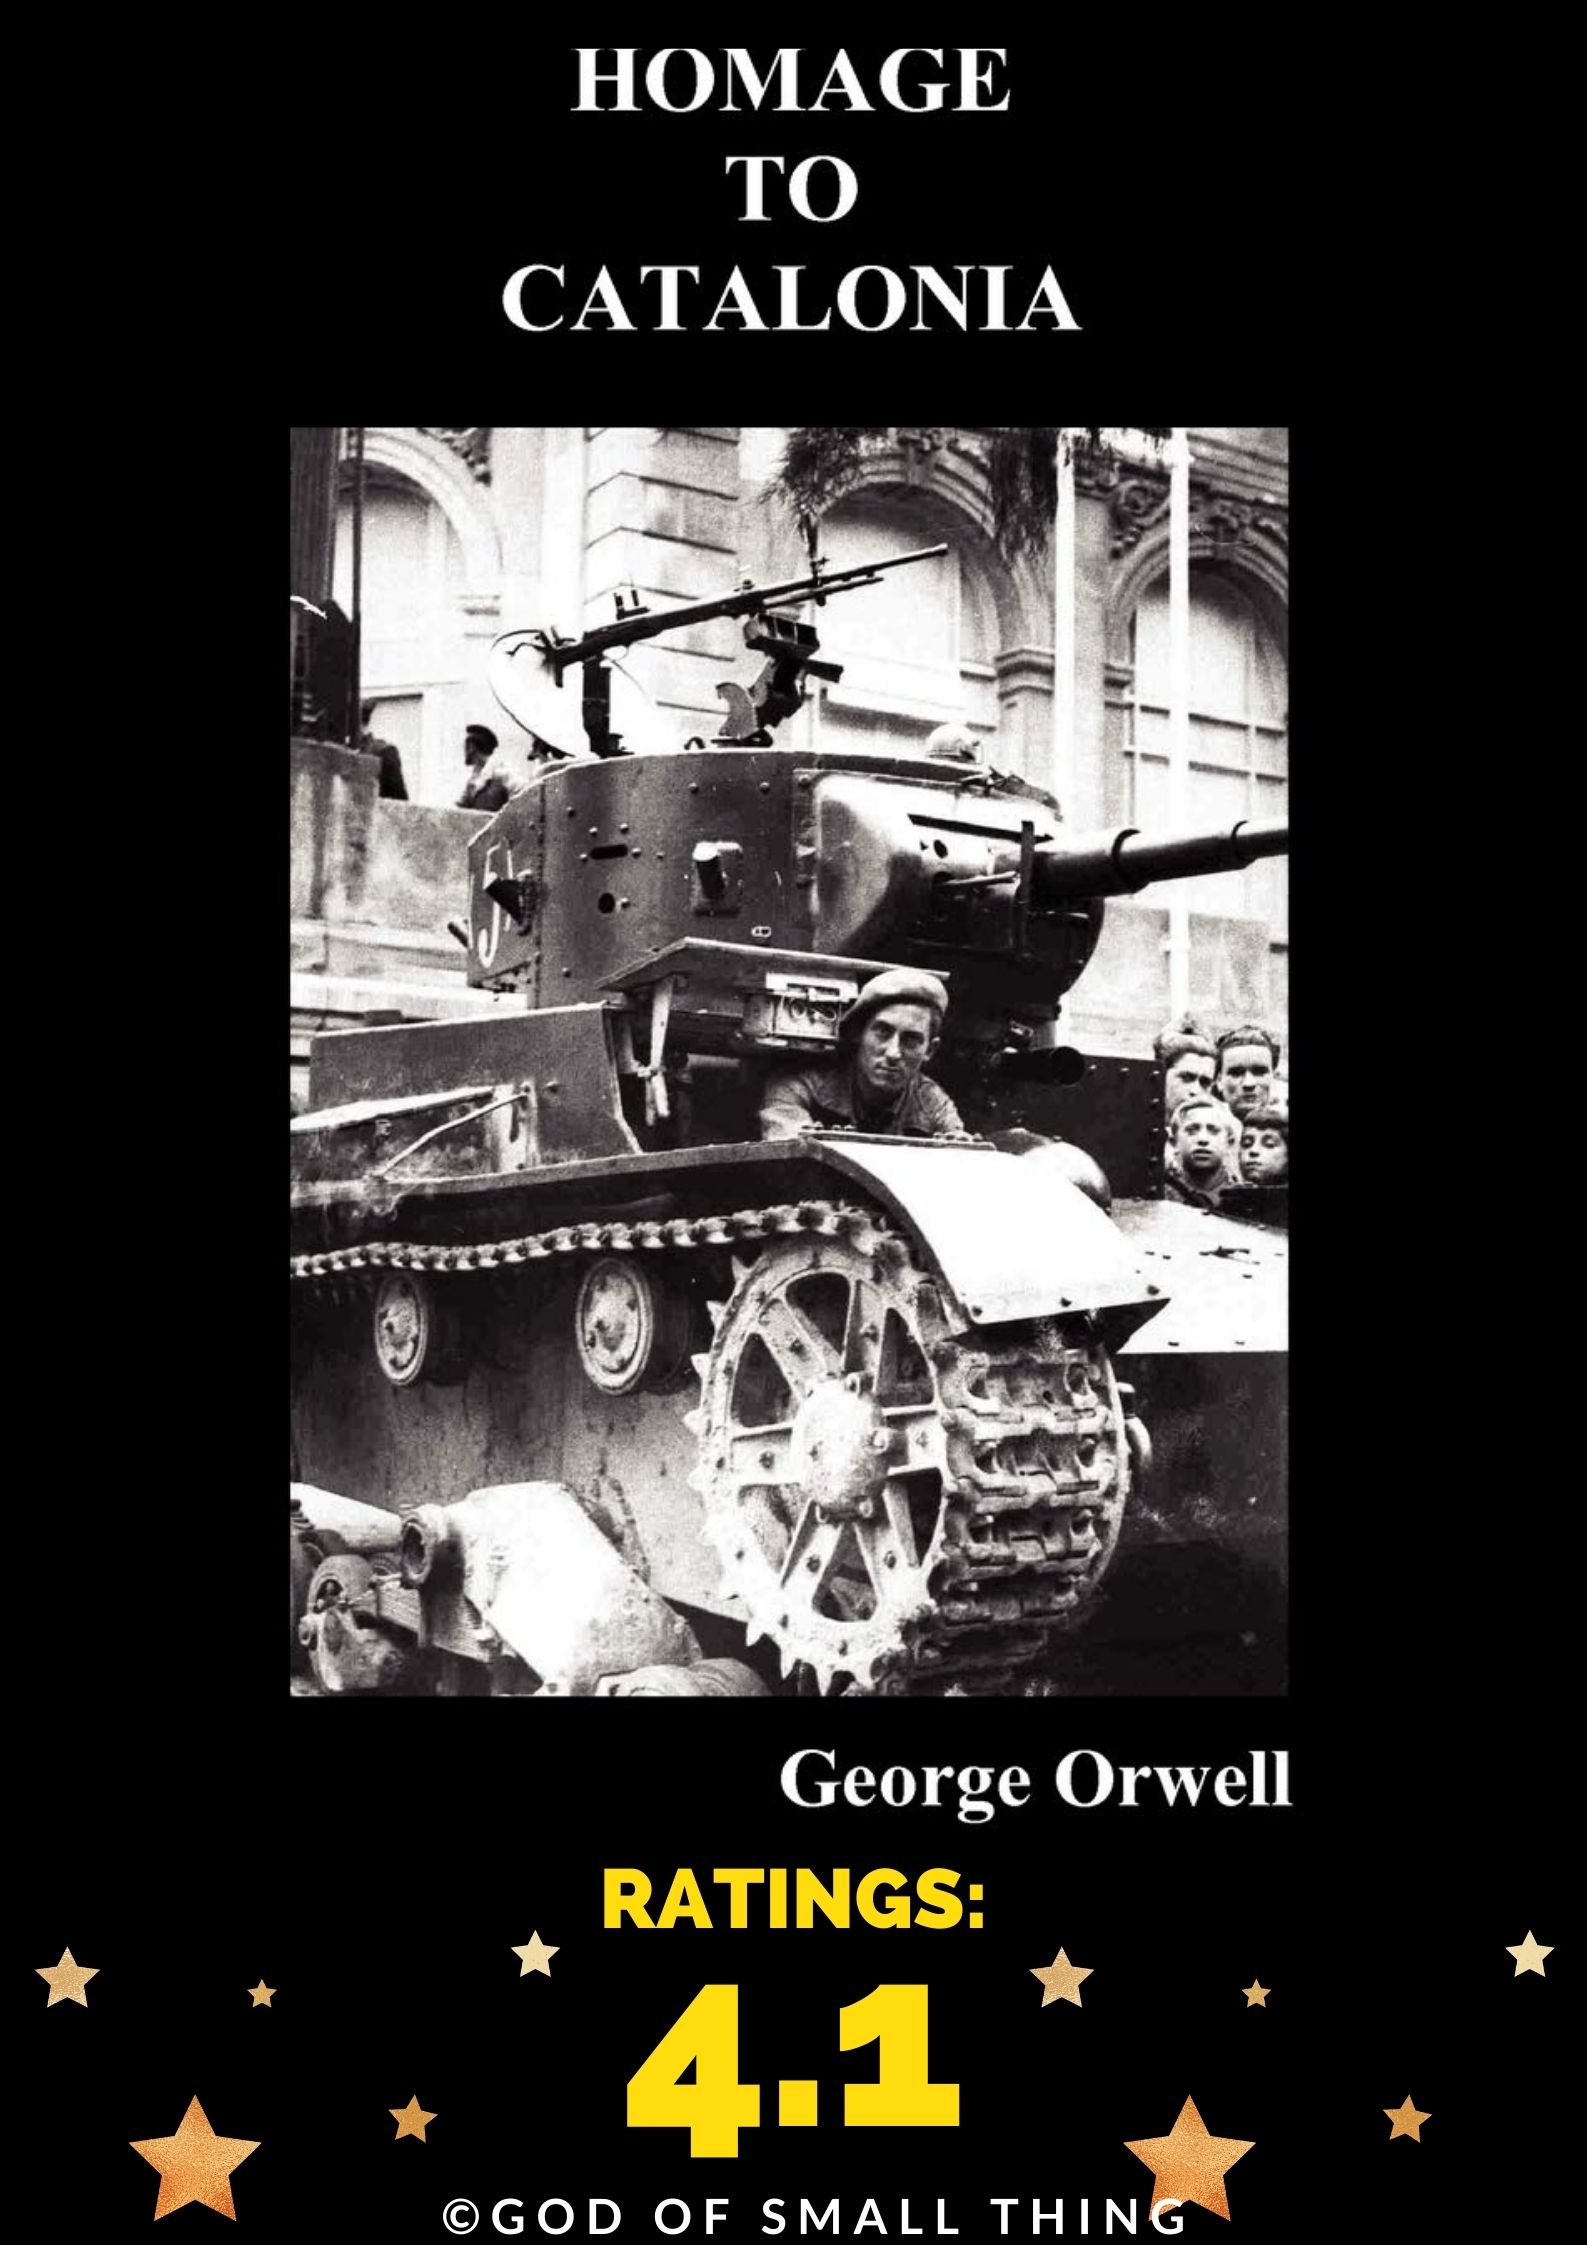 George Orwell Best book Homage to Catalonia